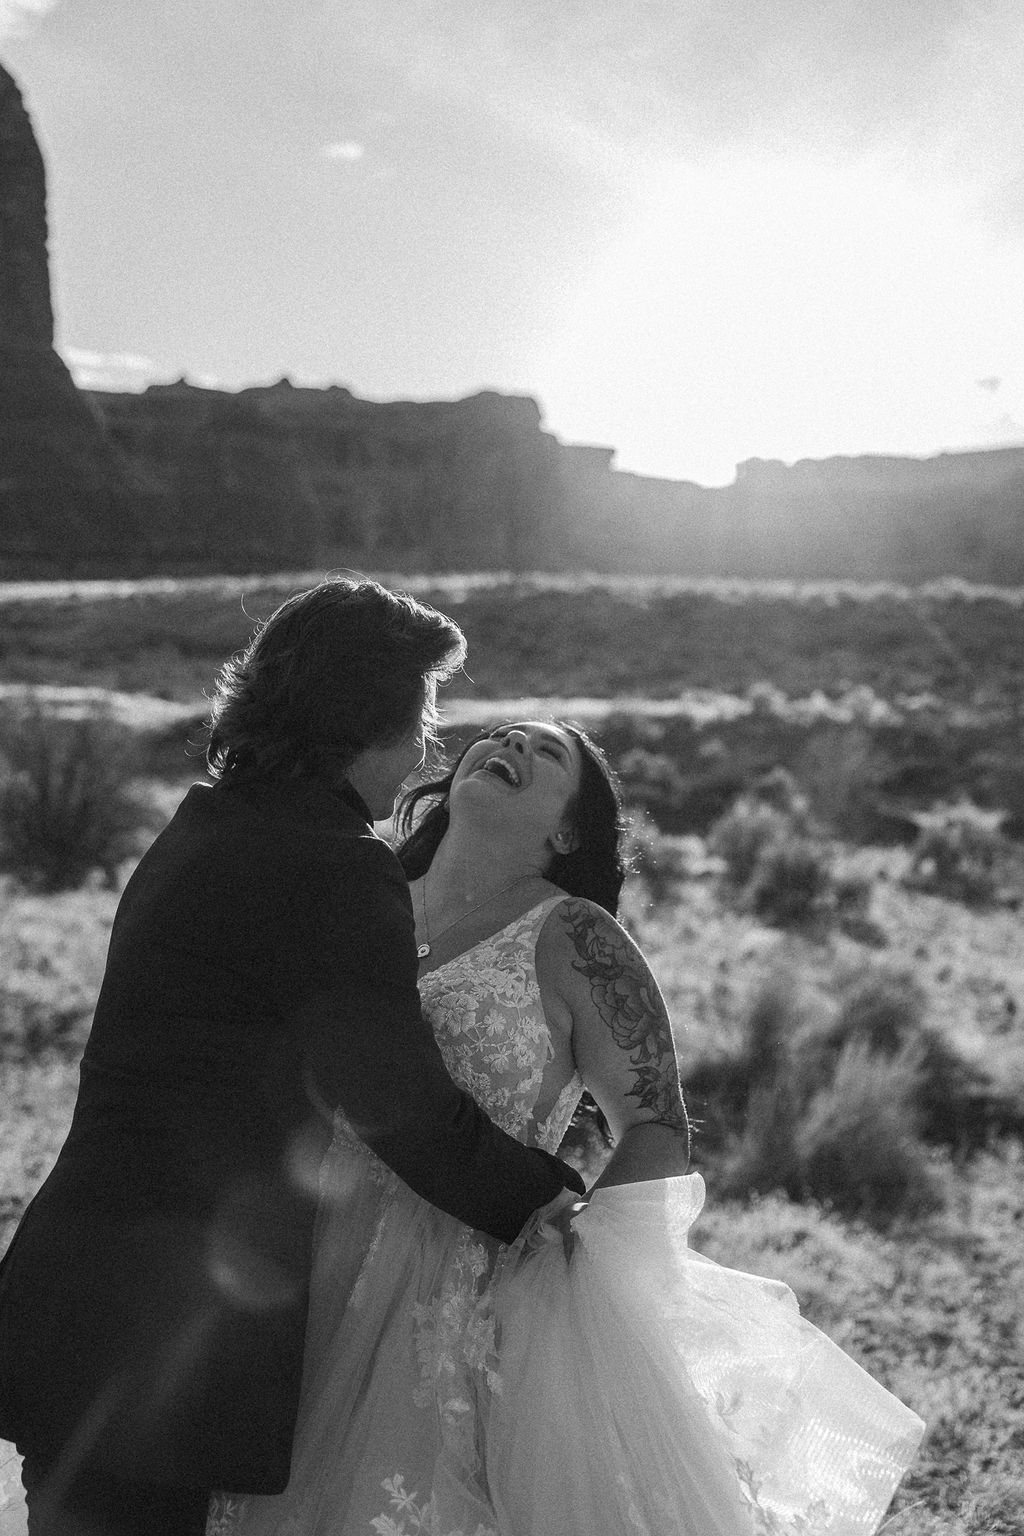 A couple in wedding attire embracing in front of the balanced rock formation in arches national park.